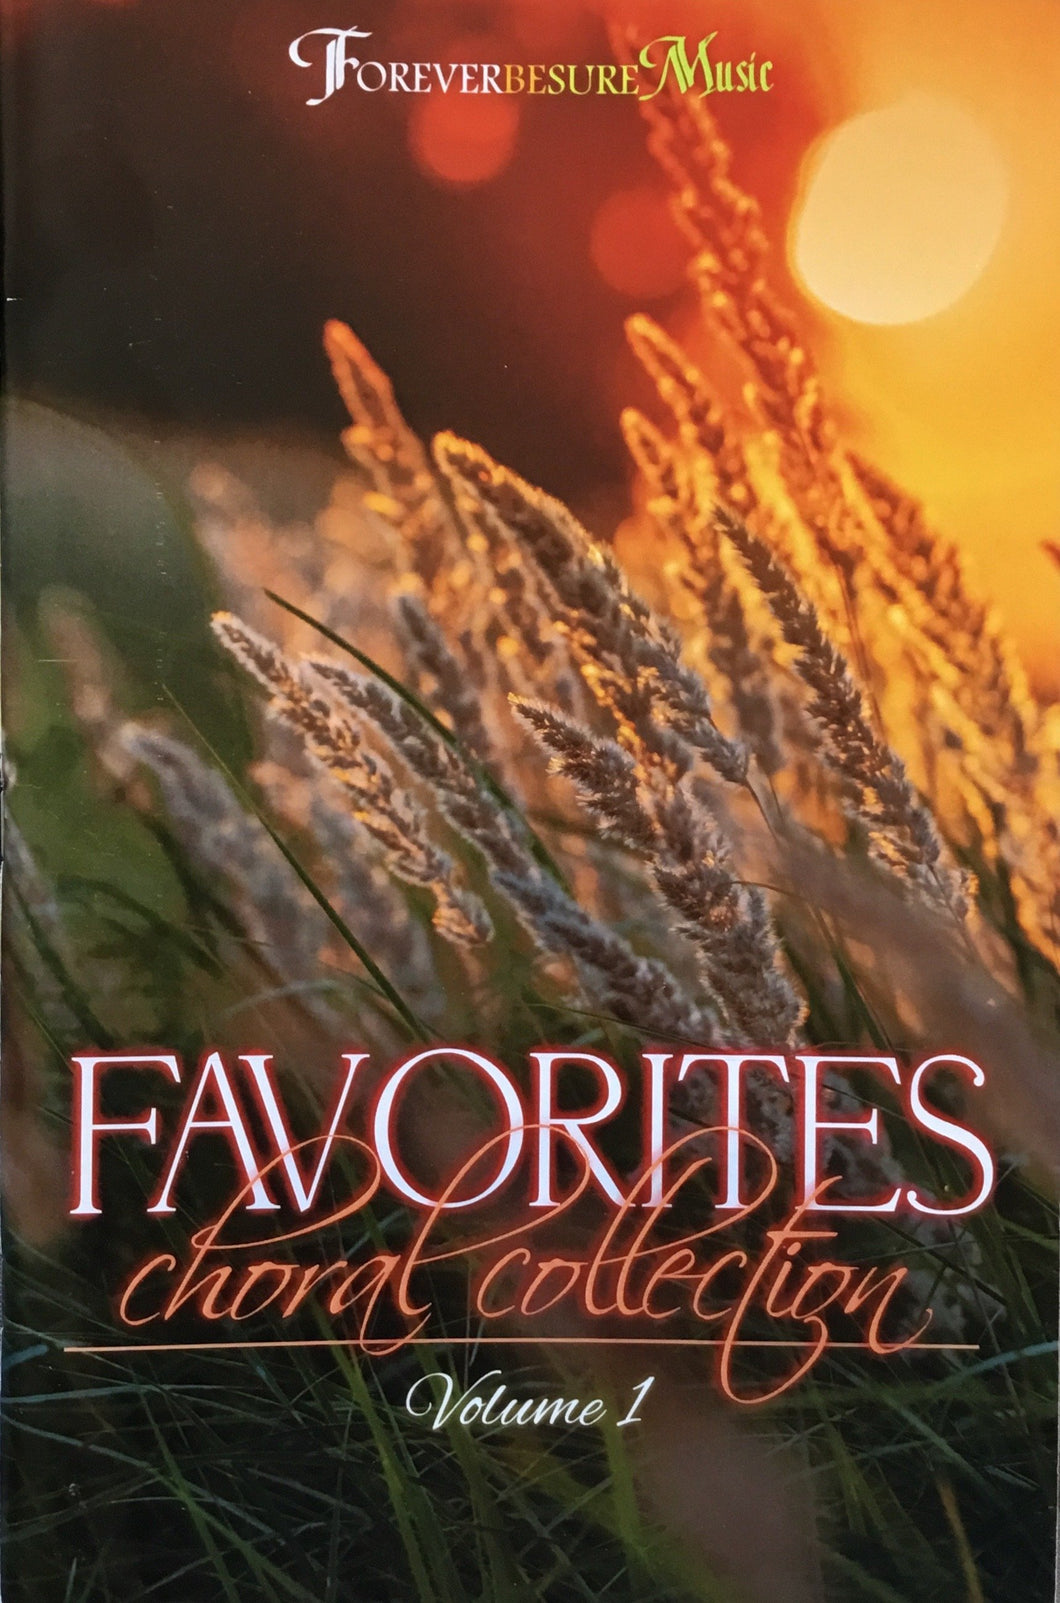 Favorites Choral Collection Vol. 1